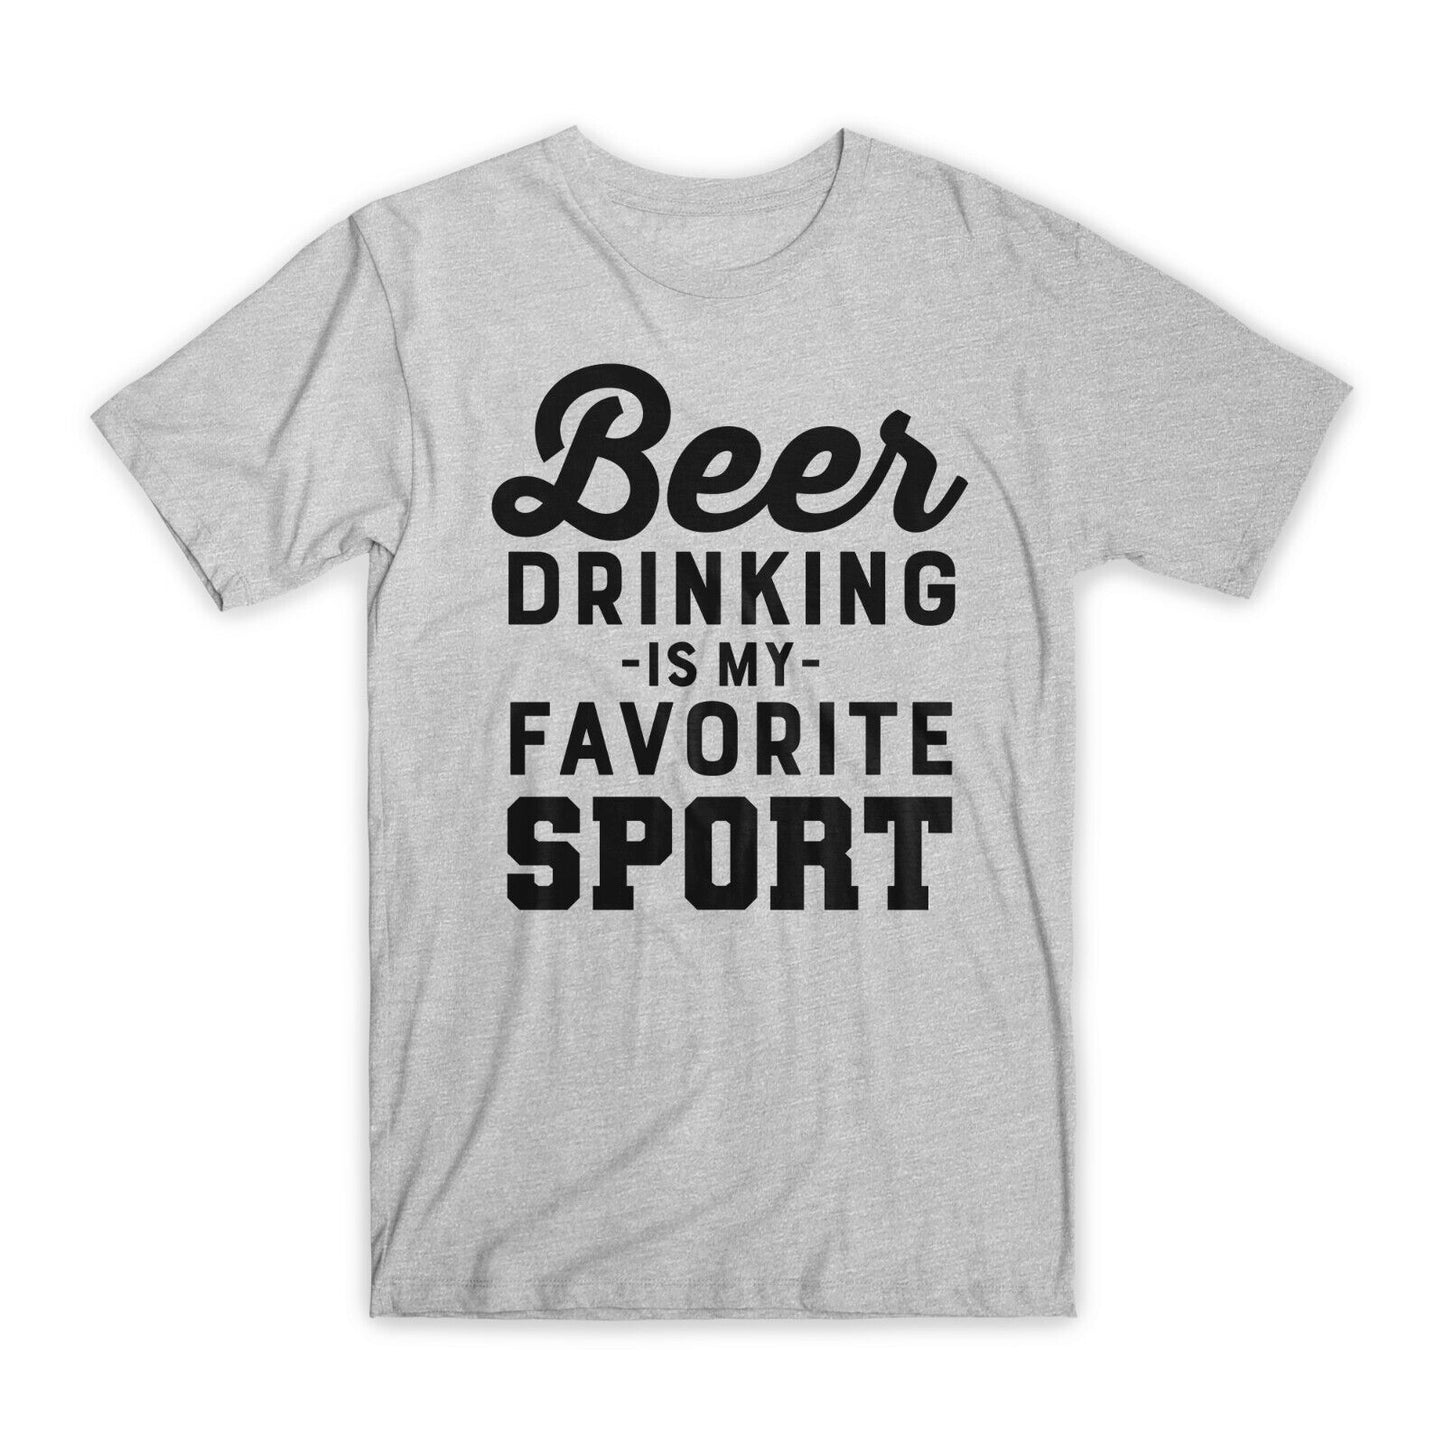 Beer Drinking is My Favorite Sport T-Shirt Premium Soft Cotton Funny T Gift NEW